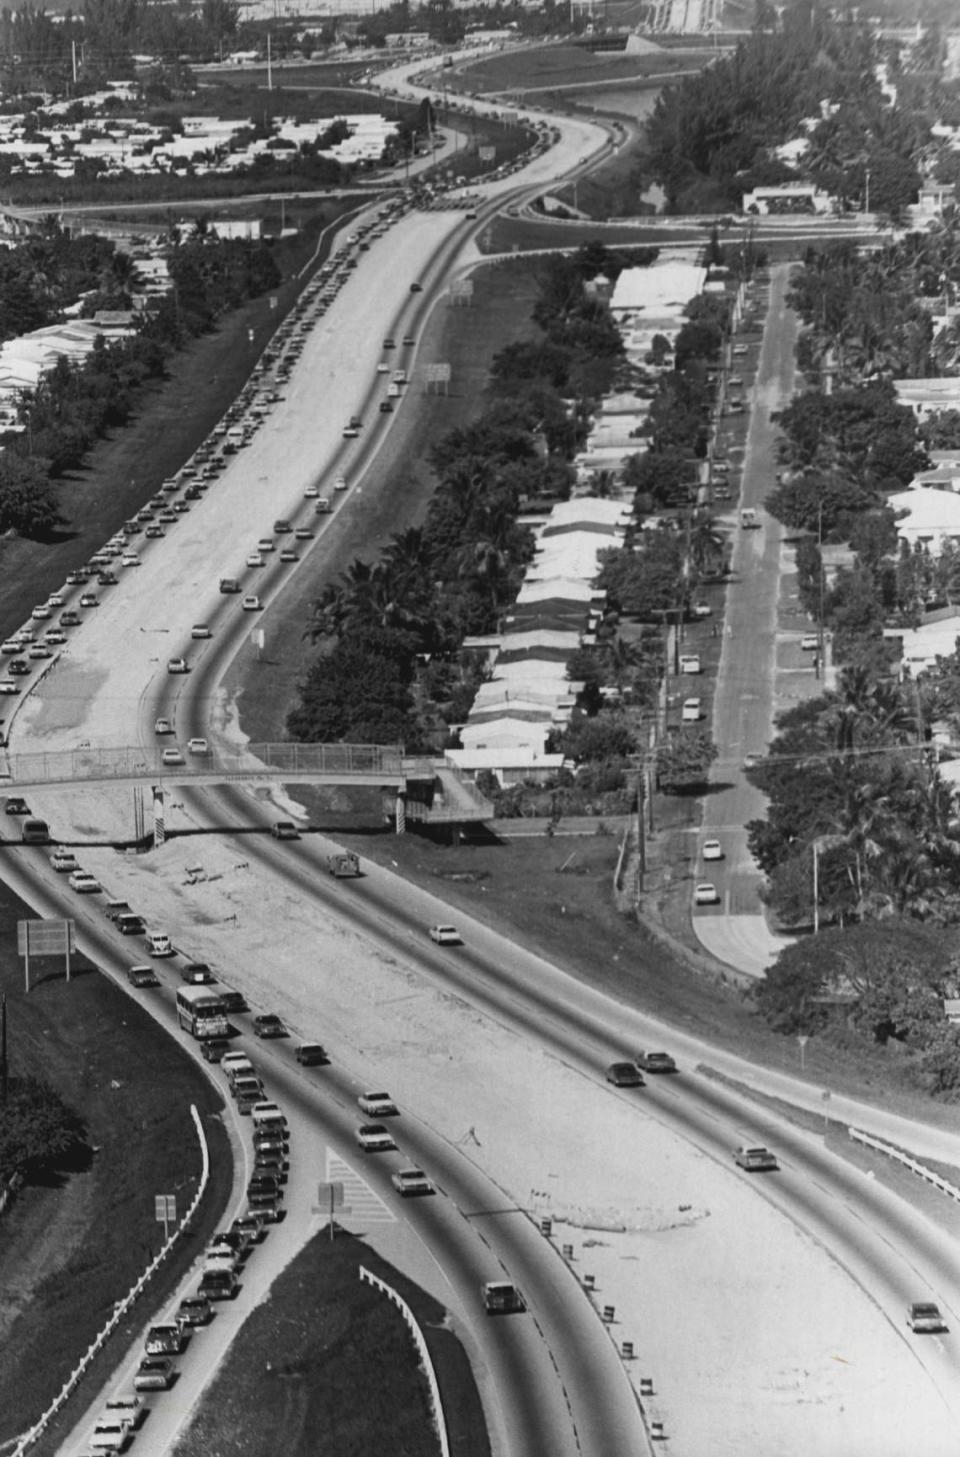 The Palmetto Expressway in 1969, looking north near Tropical Park.